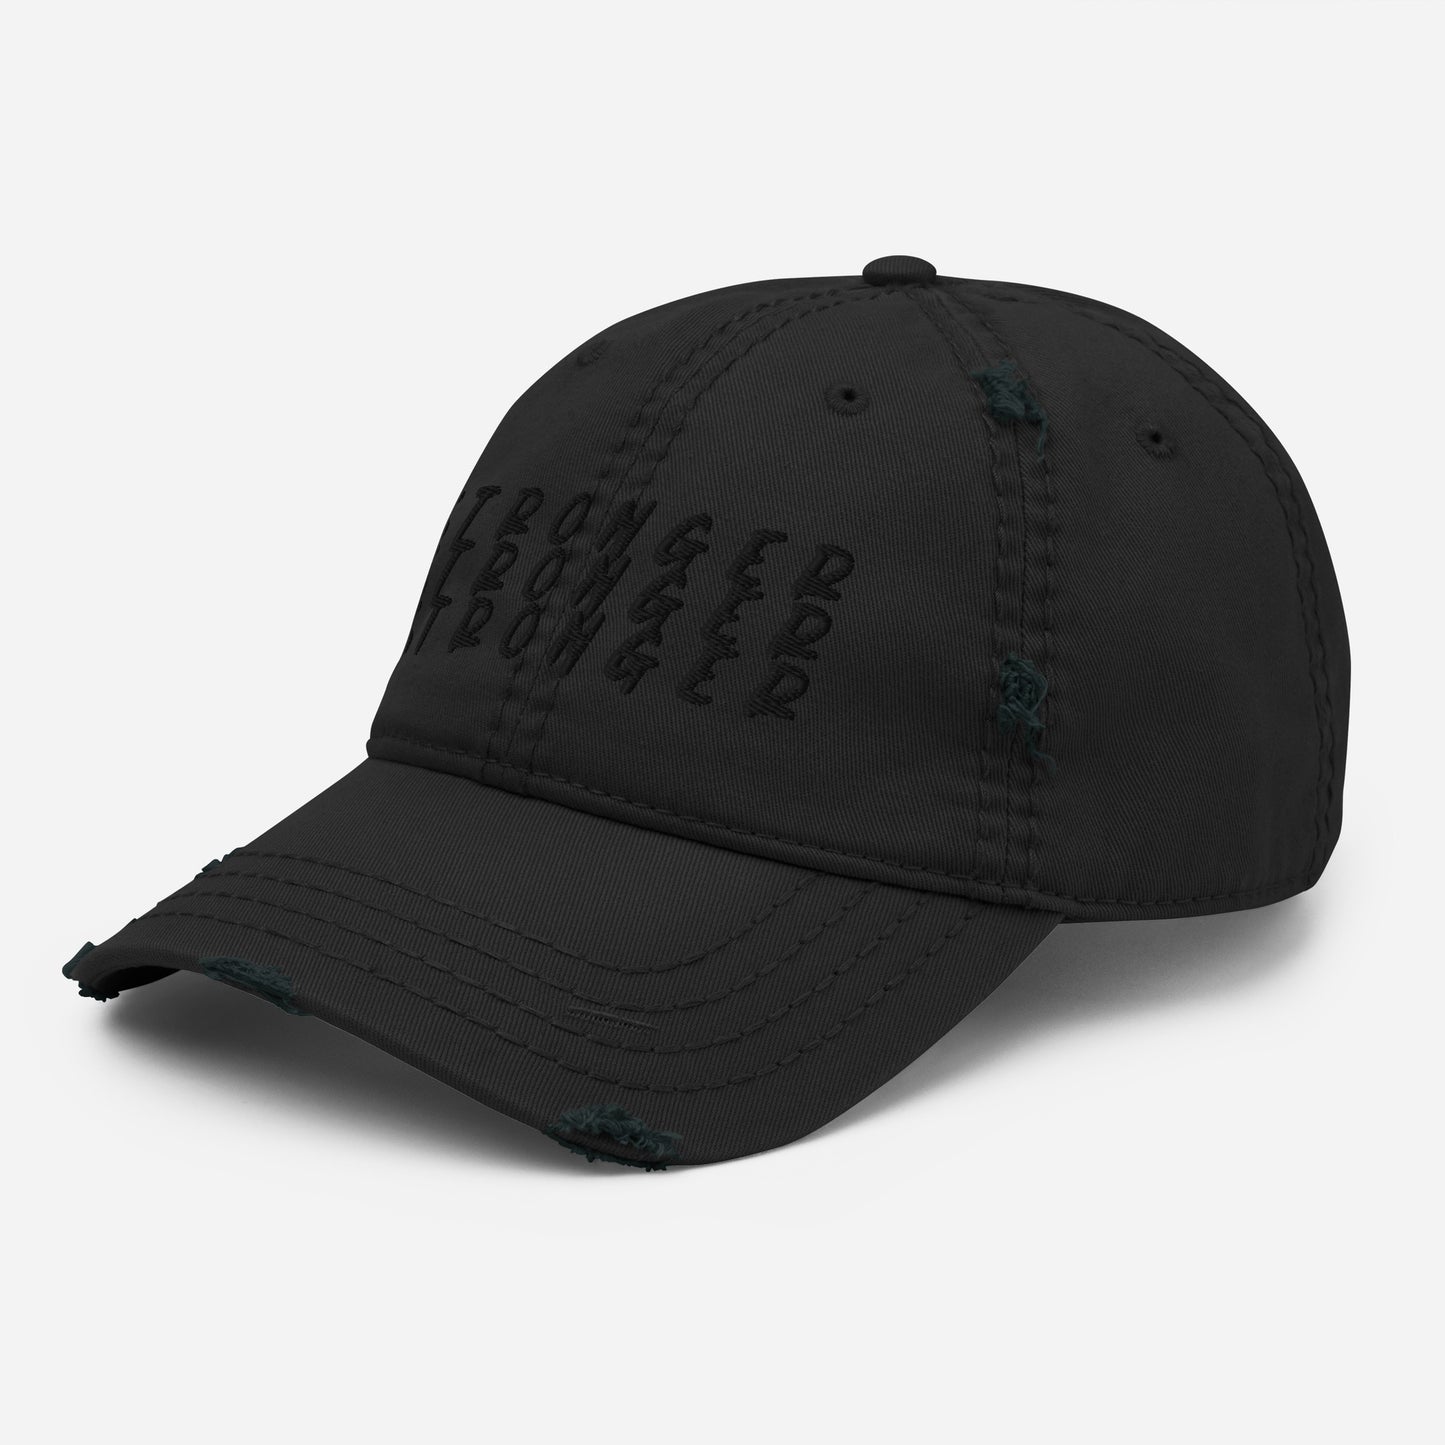 "Stronger"  Distressed Hat